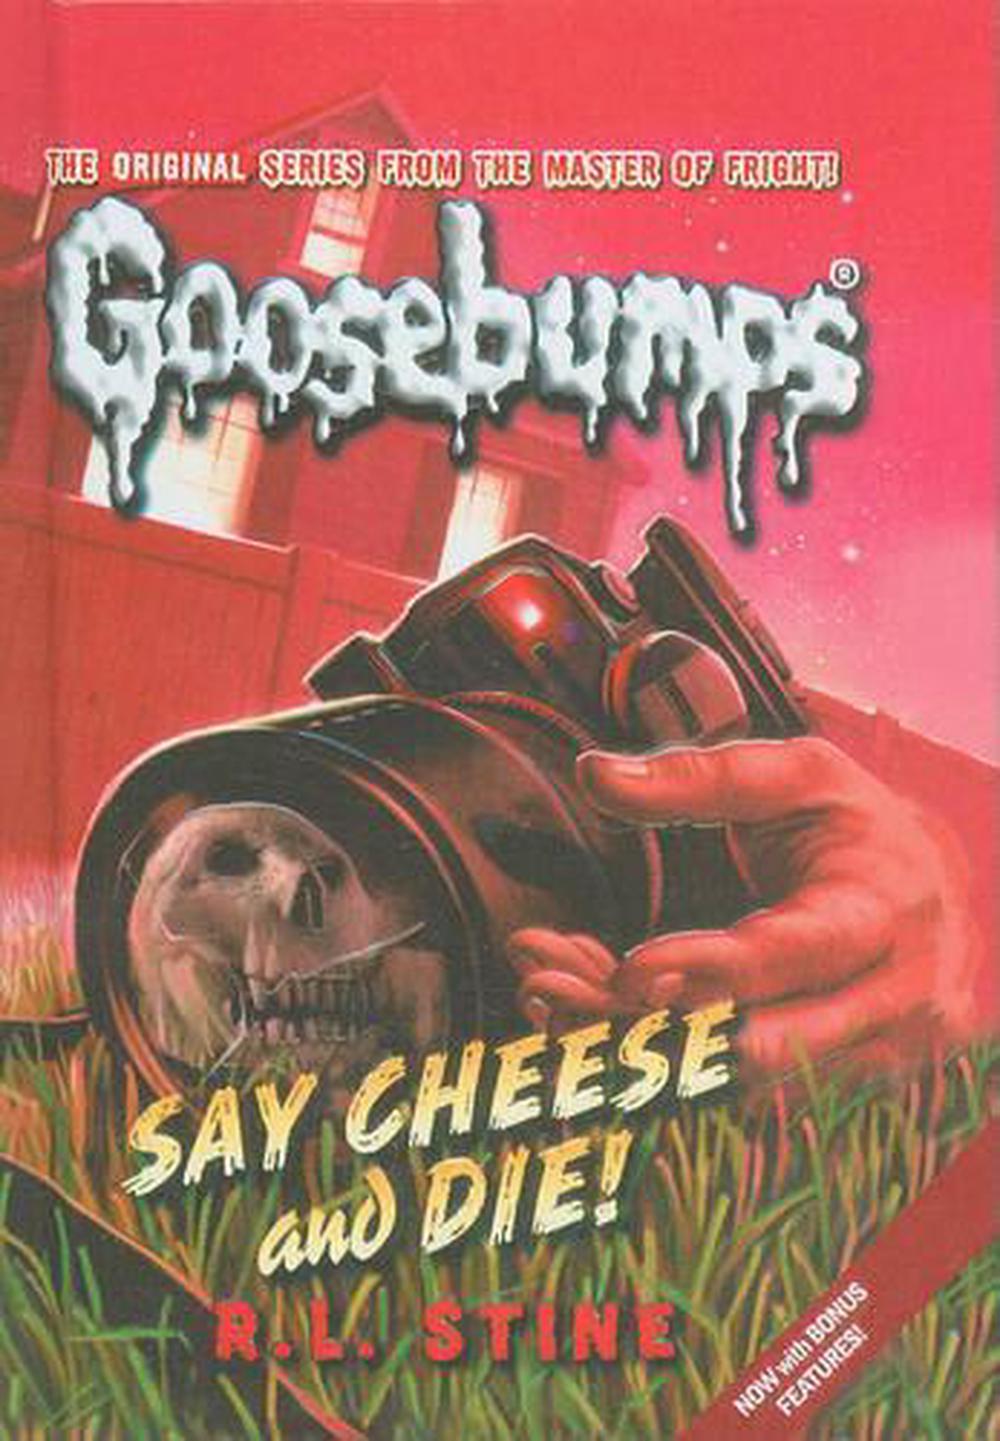 say cheese and die by rl stine